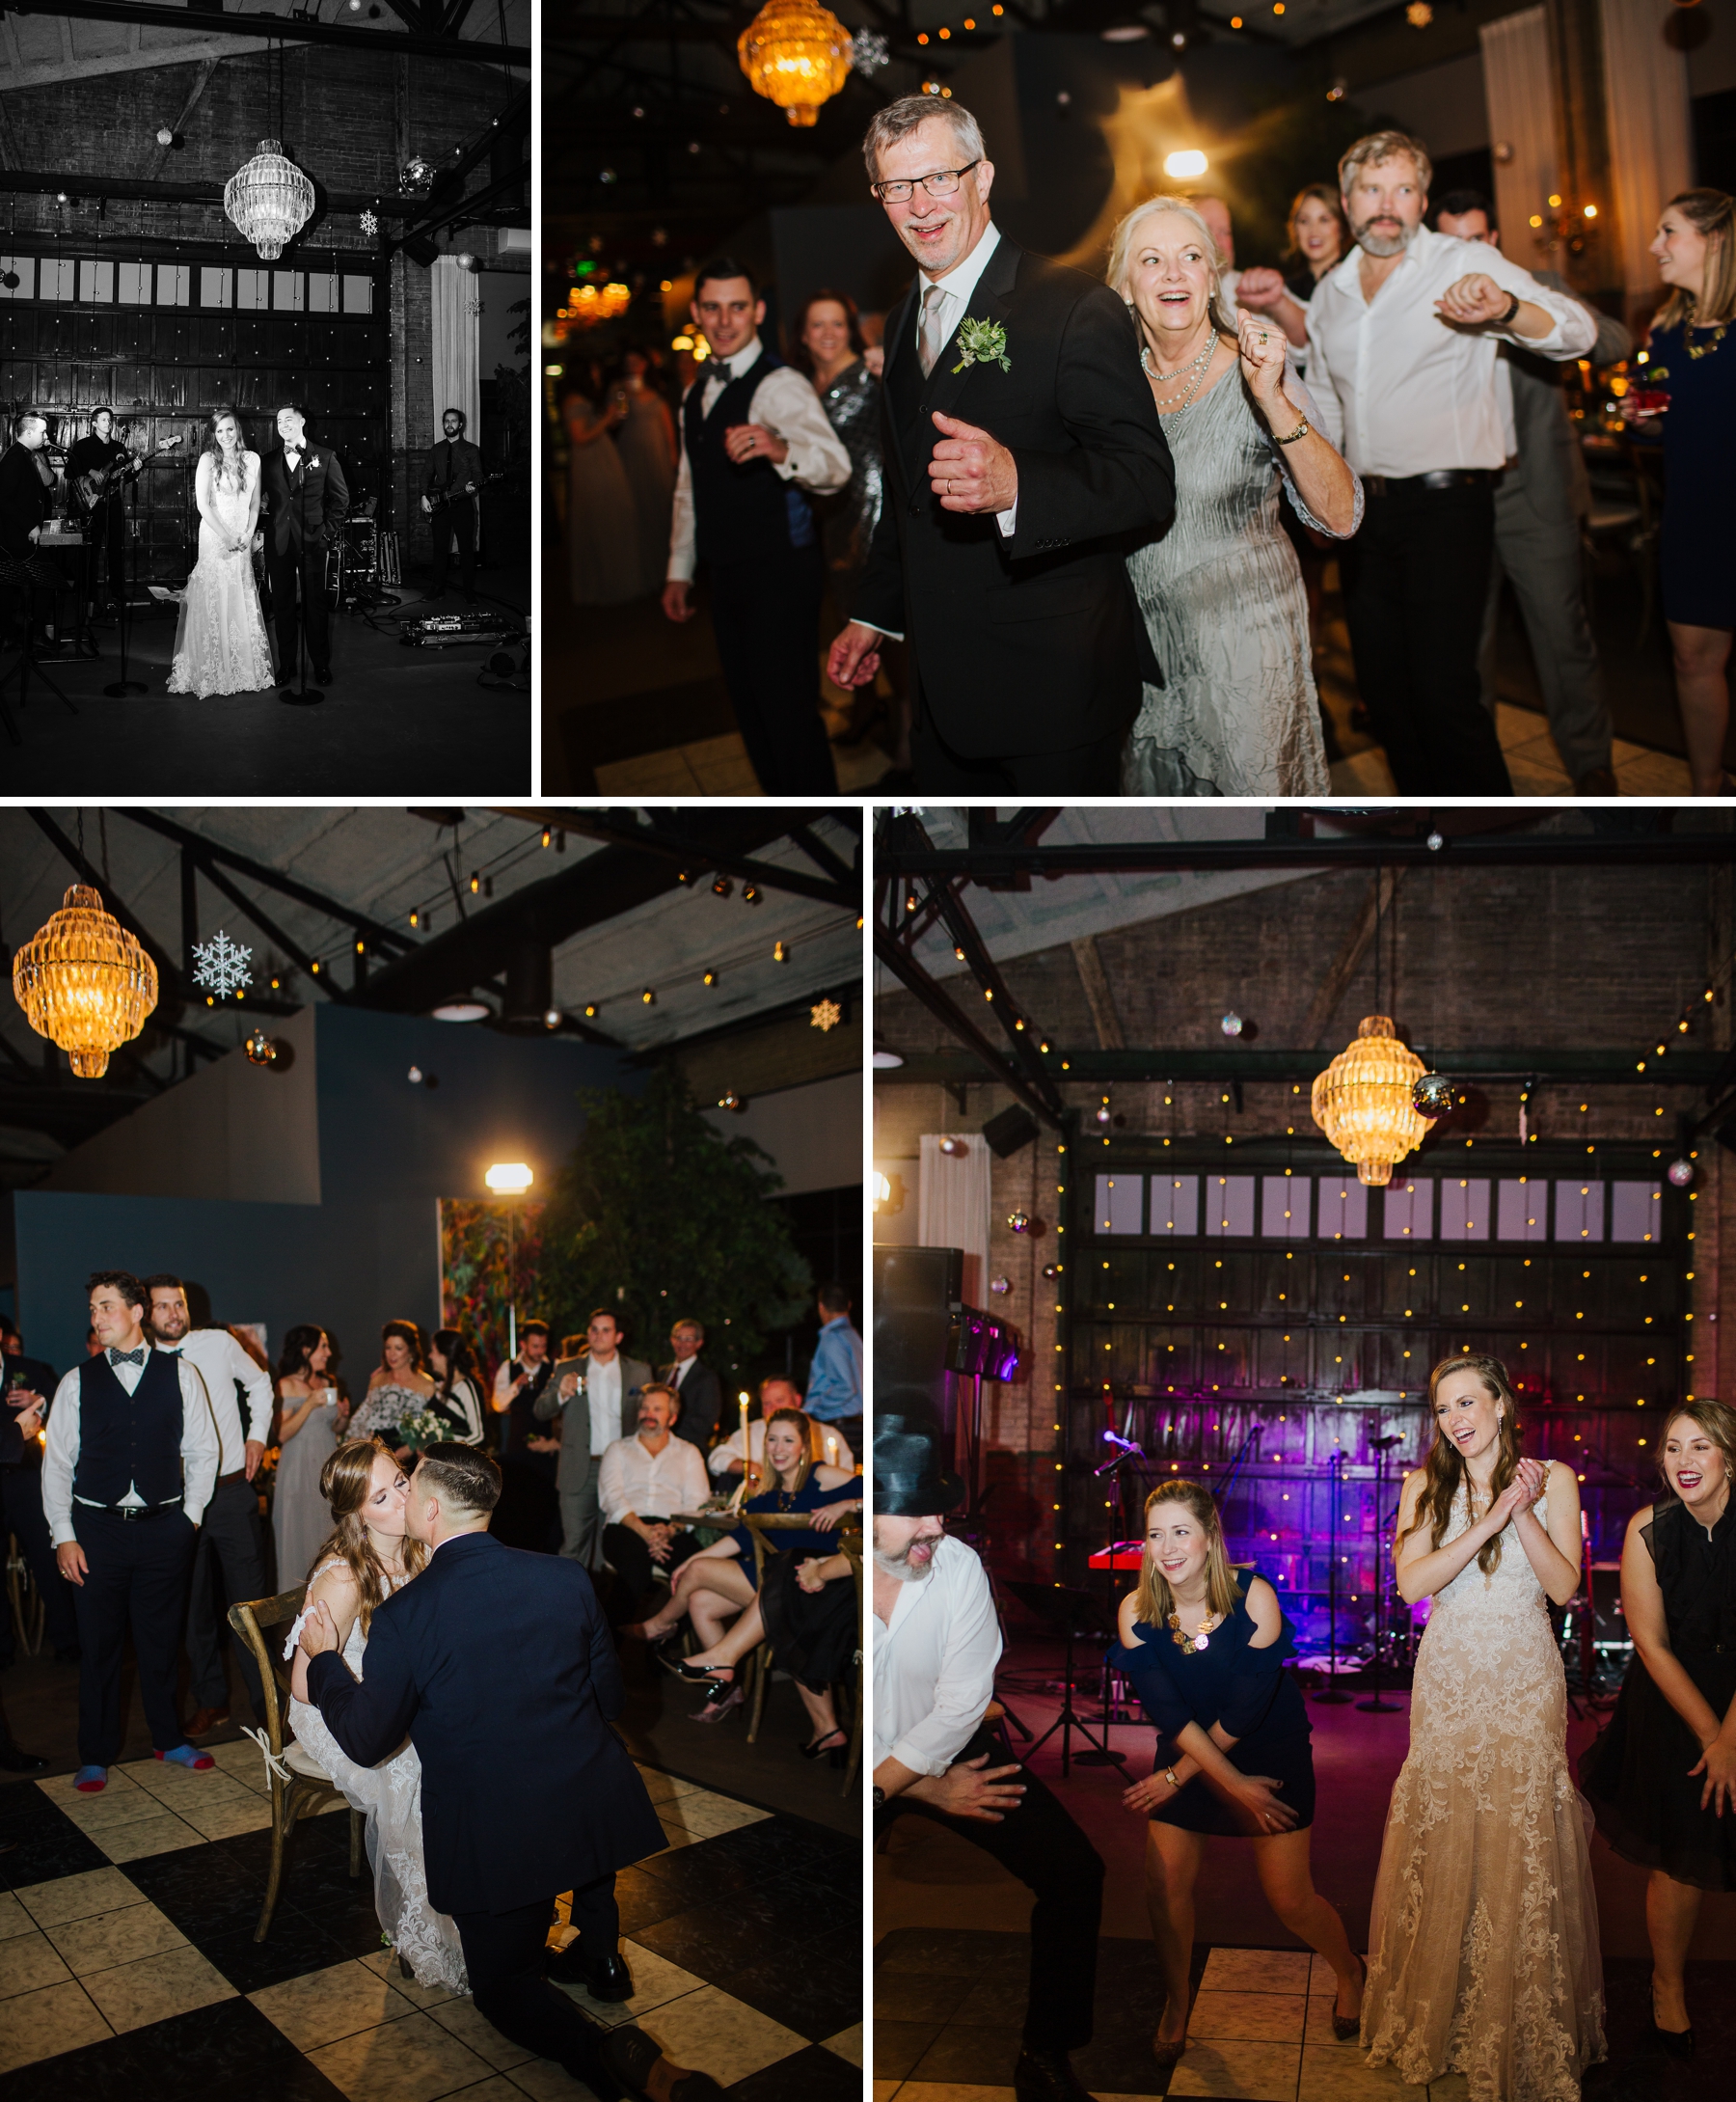 Emilee and Jenkins winter wedding at Soho South Café, planning by Posh Petals and Pearls